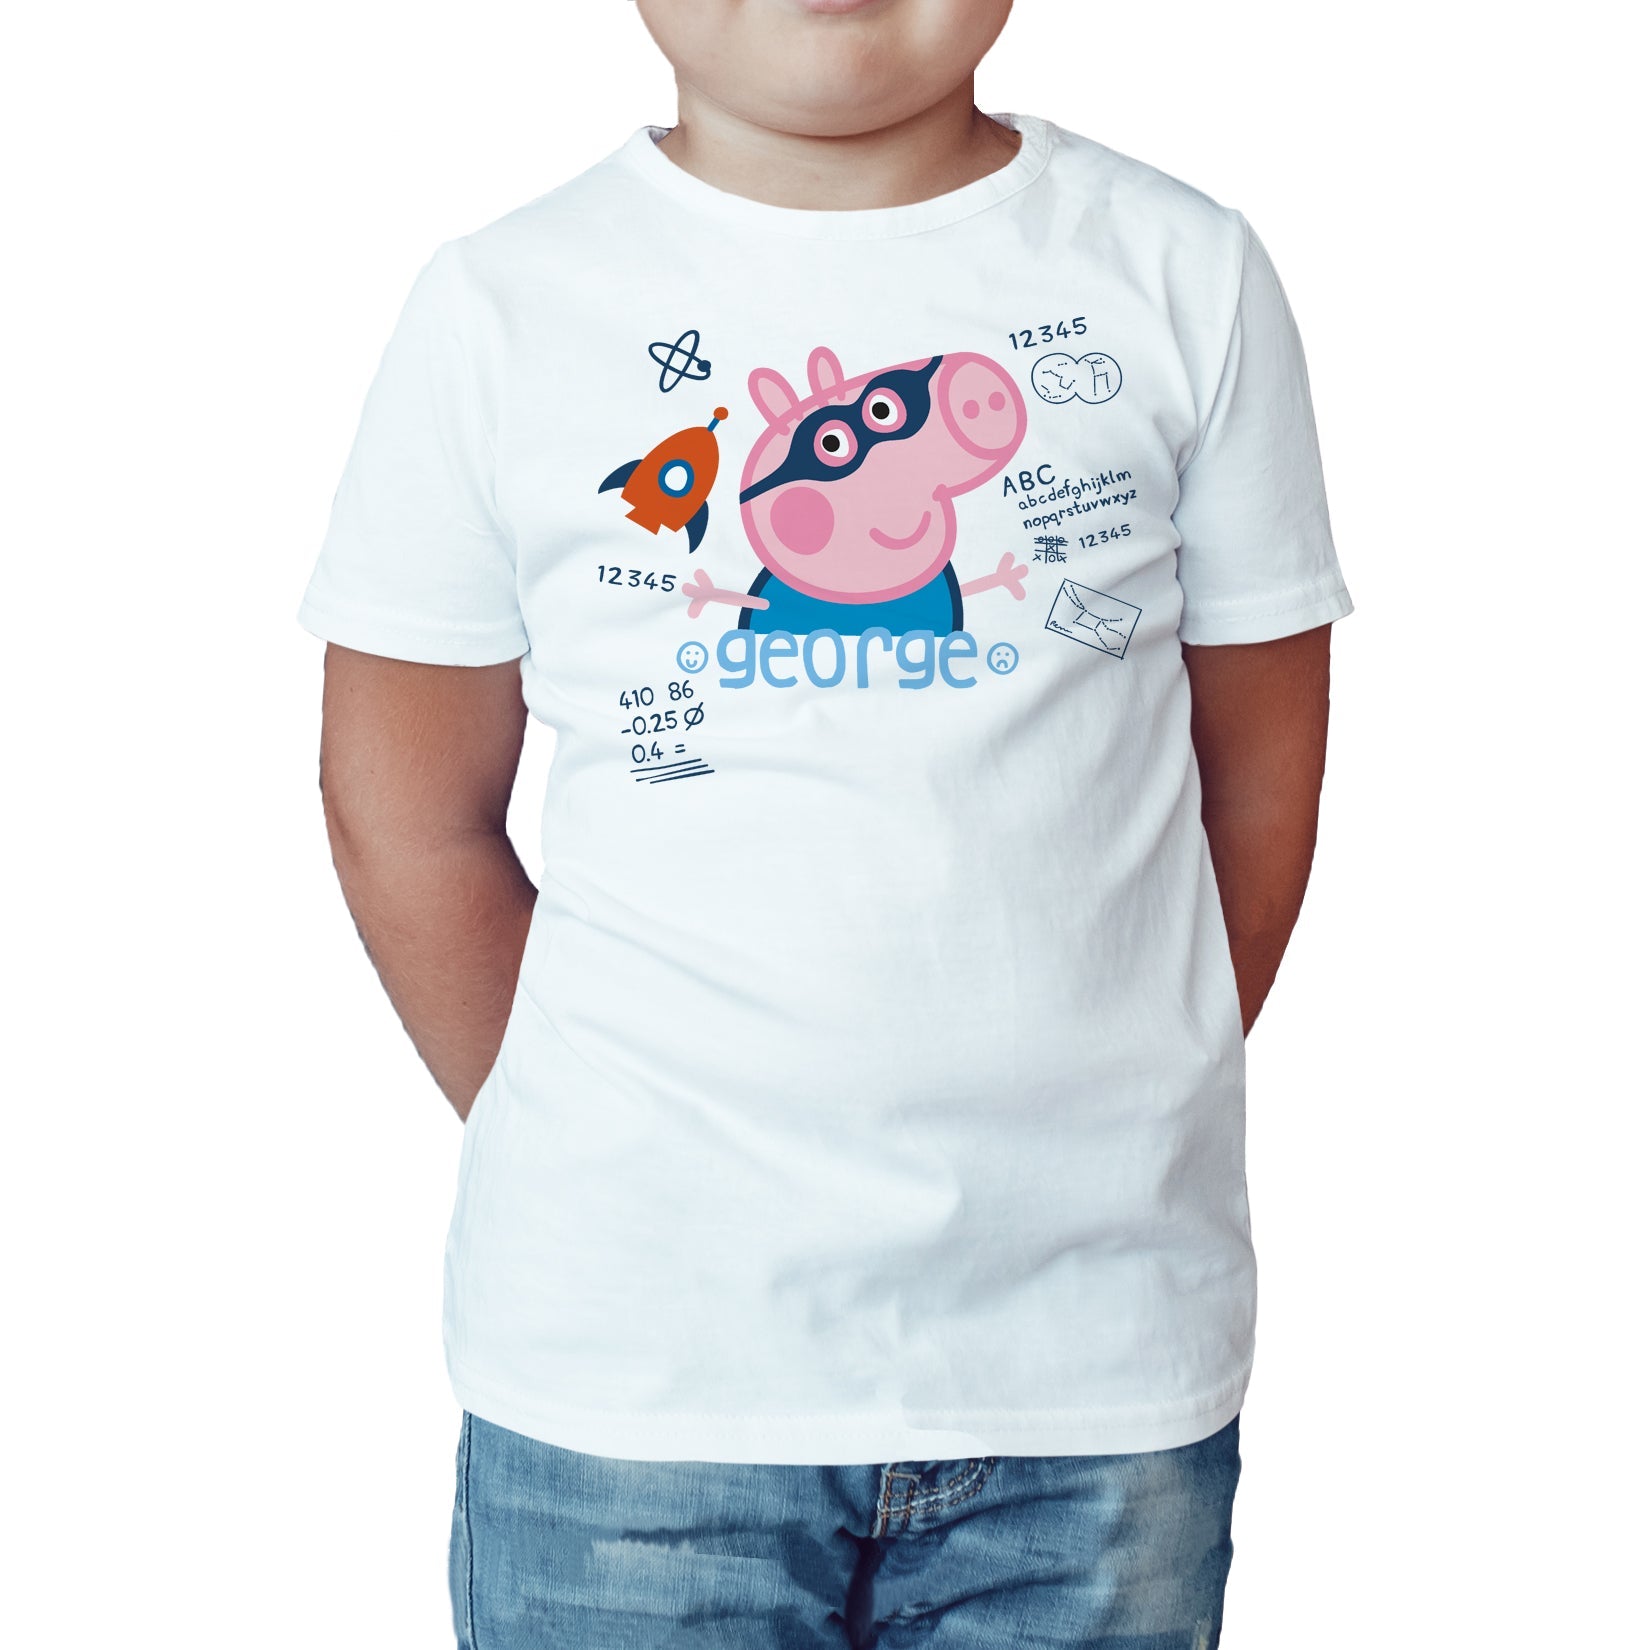 Peppa Pig George Doodle Official Kid's T-Shirt ()